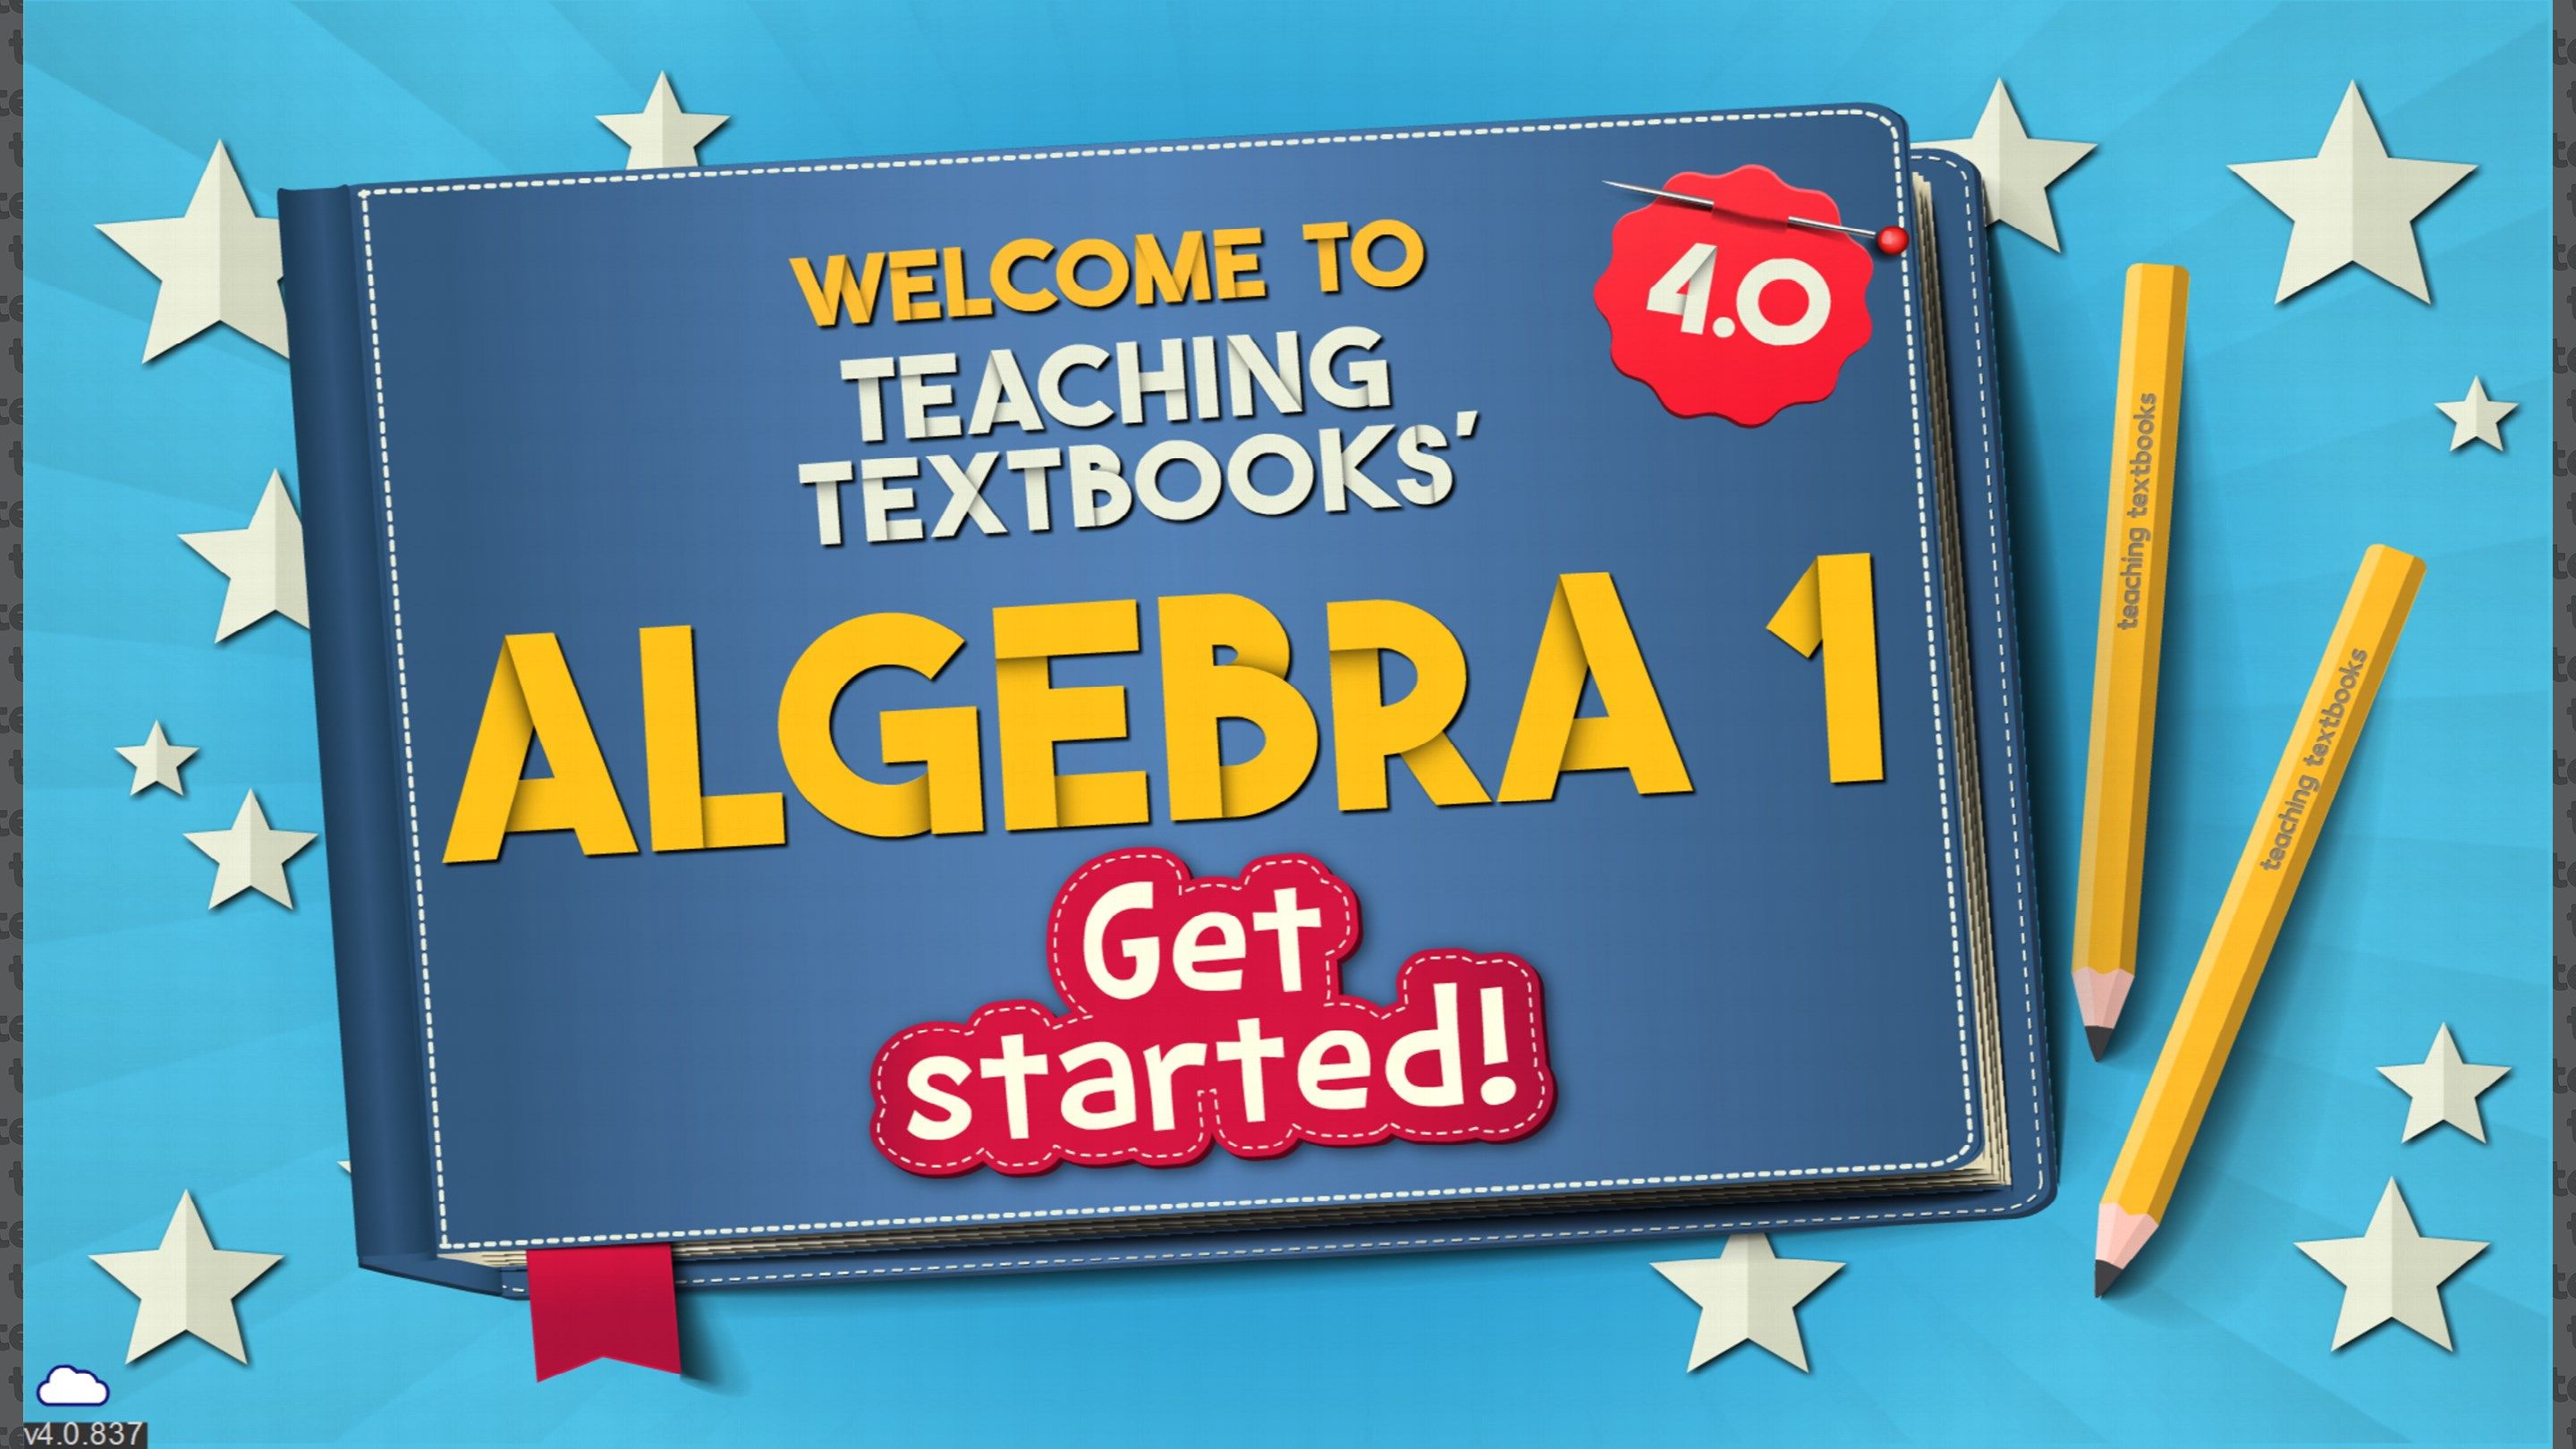 When the app launches, all you have to do to get started is log in with your Teaching Textbooks parent account, and it will connect to your Algebra 1 enrollment.